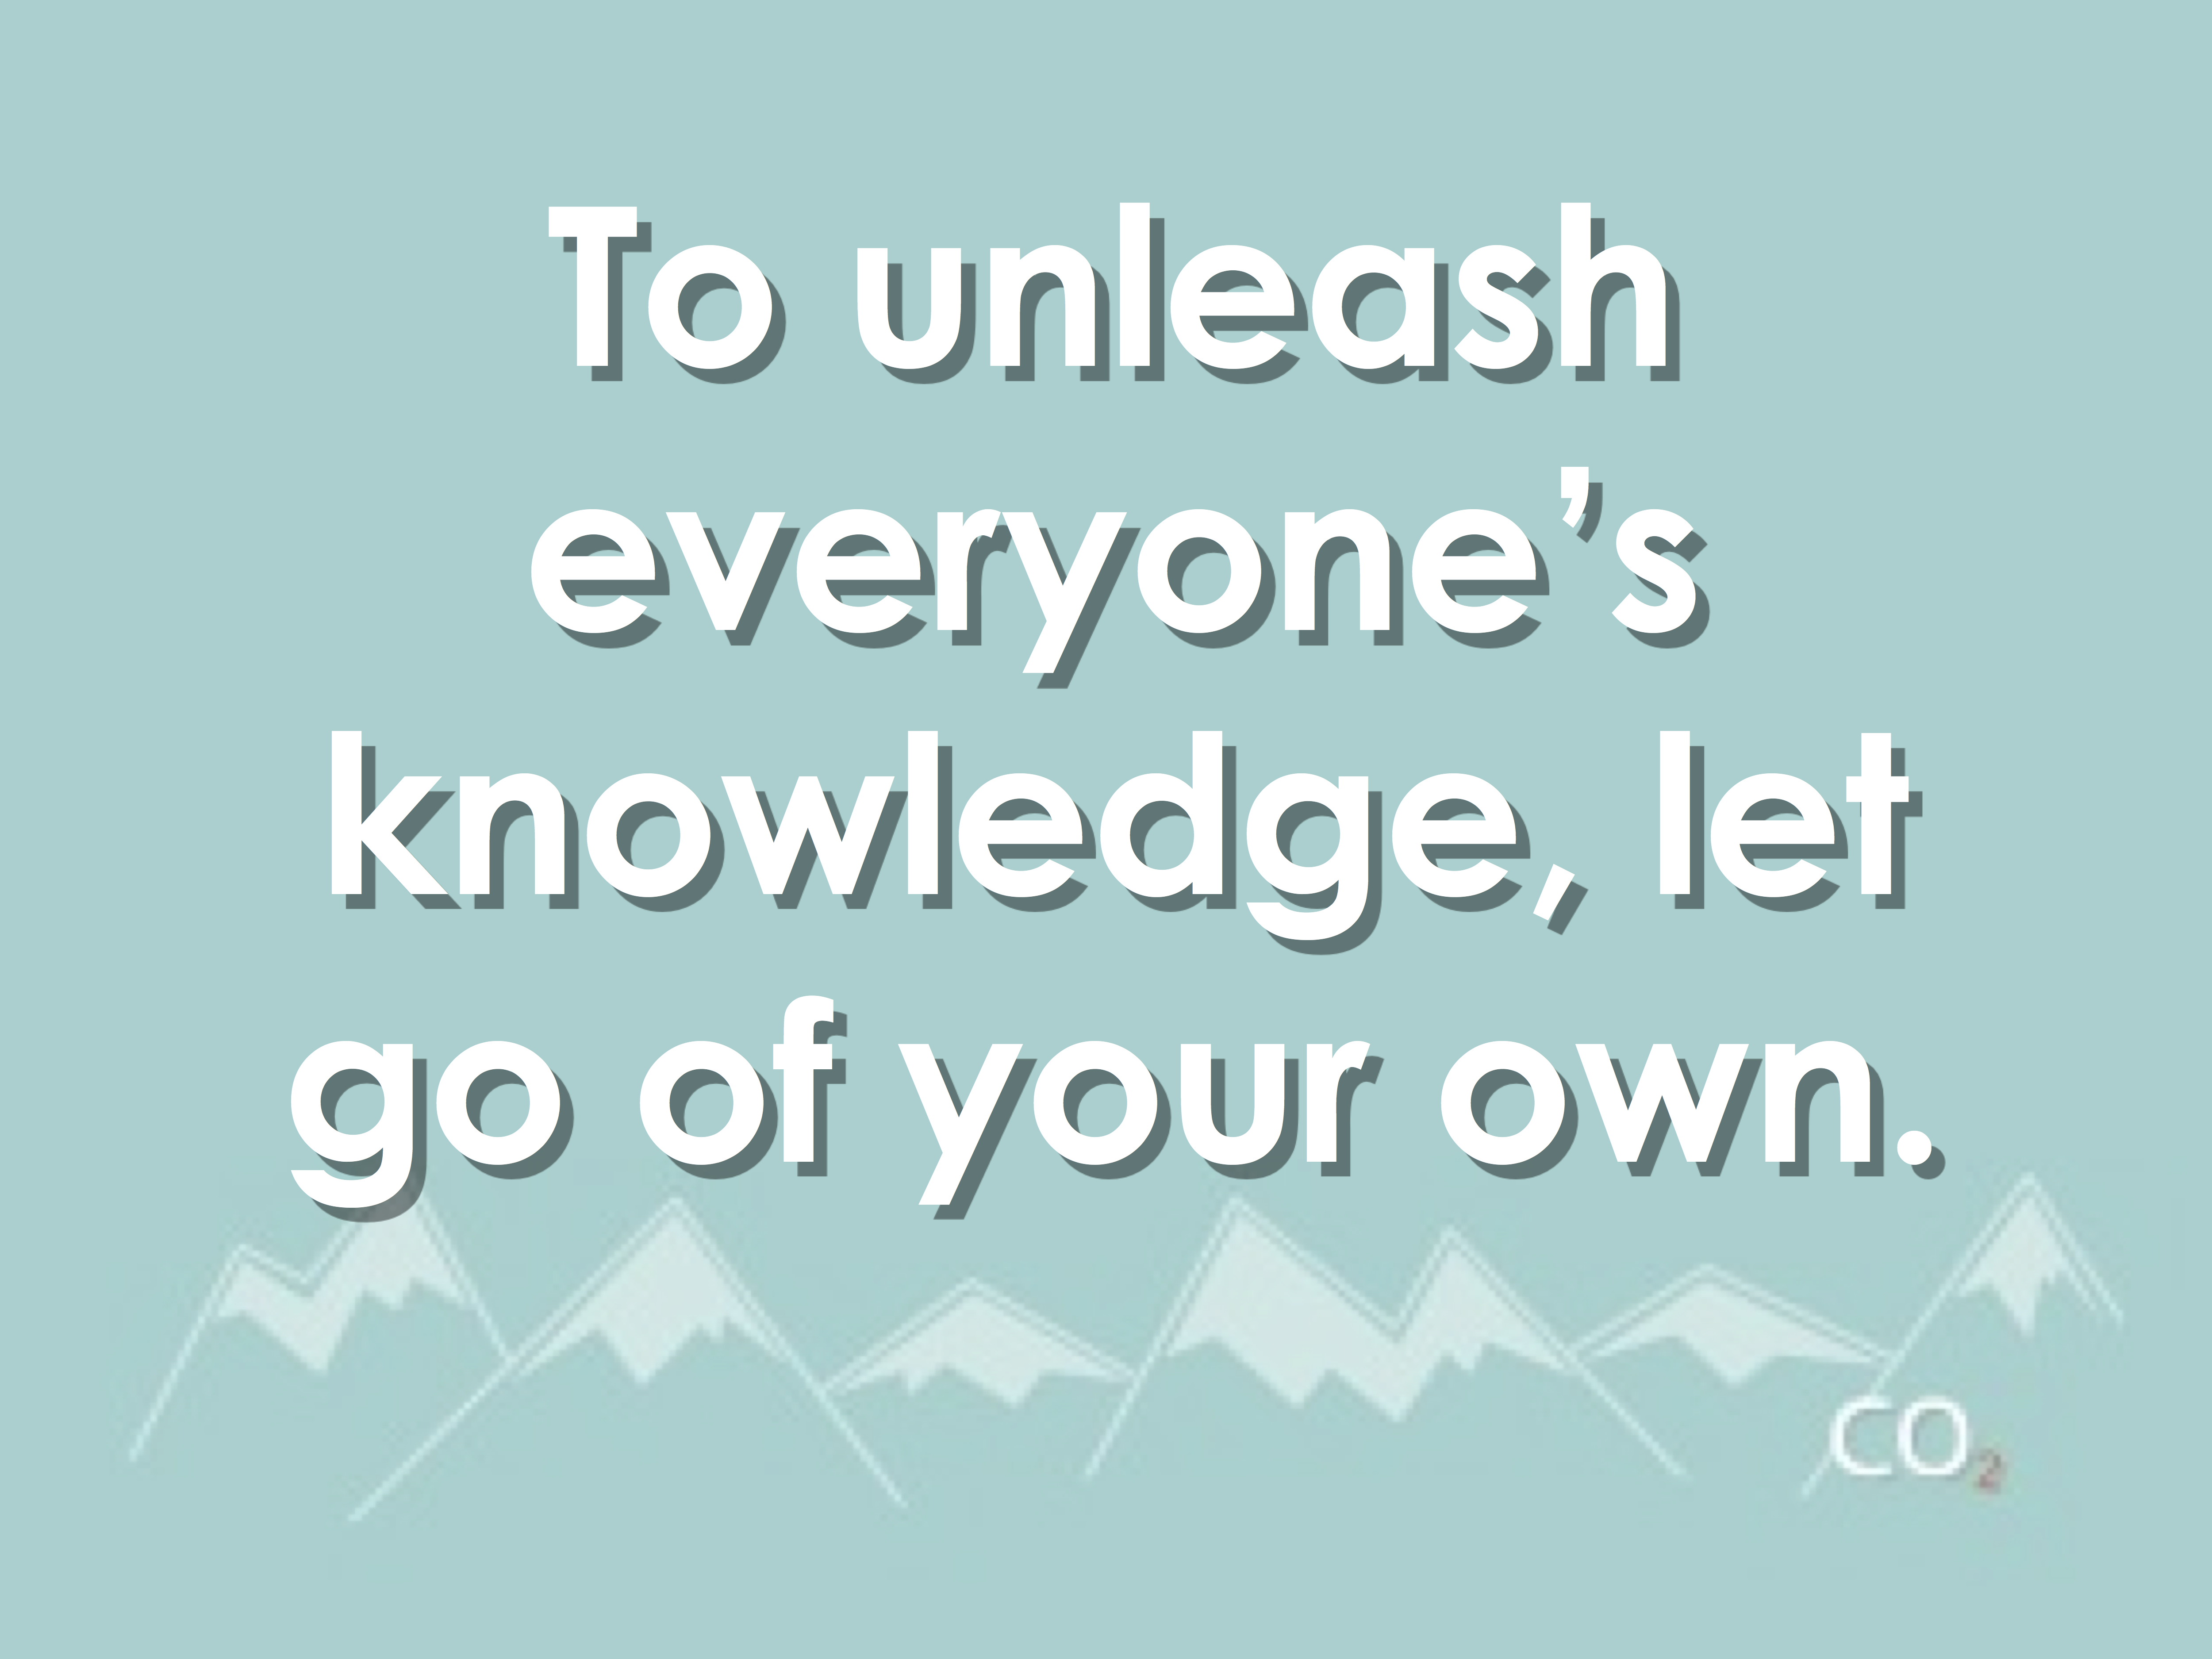 To unleash everyone’s knowledge, let go of your own. copy